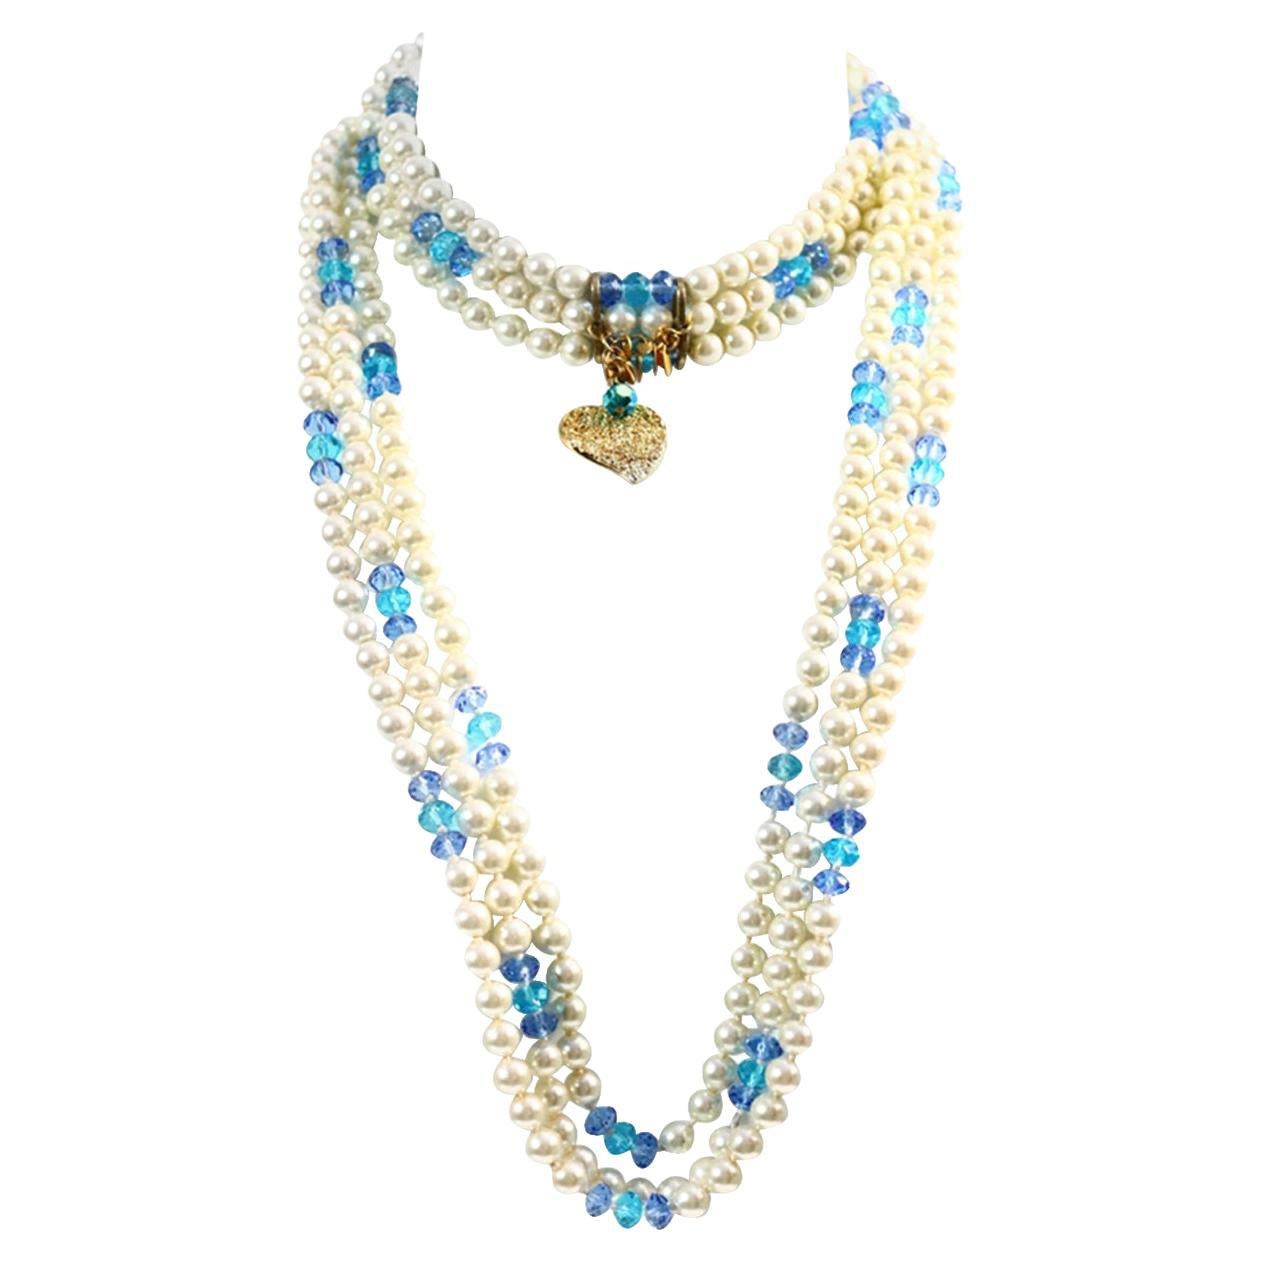 Vintage Yves Saint Laurent YSL 3 Strand Pearl and Blue Bead Necklace Circa 1990s